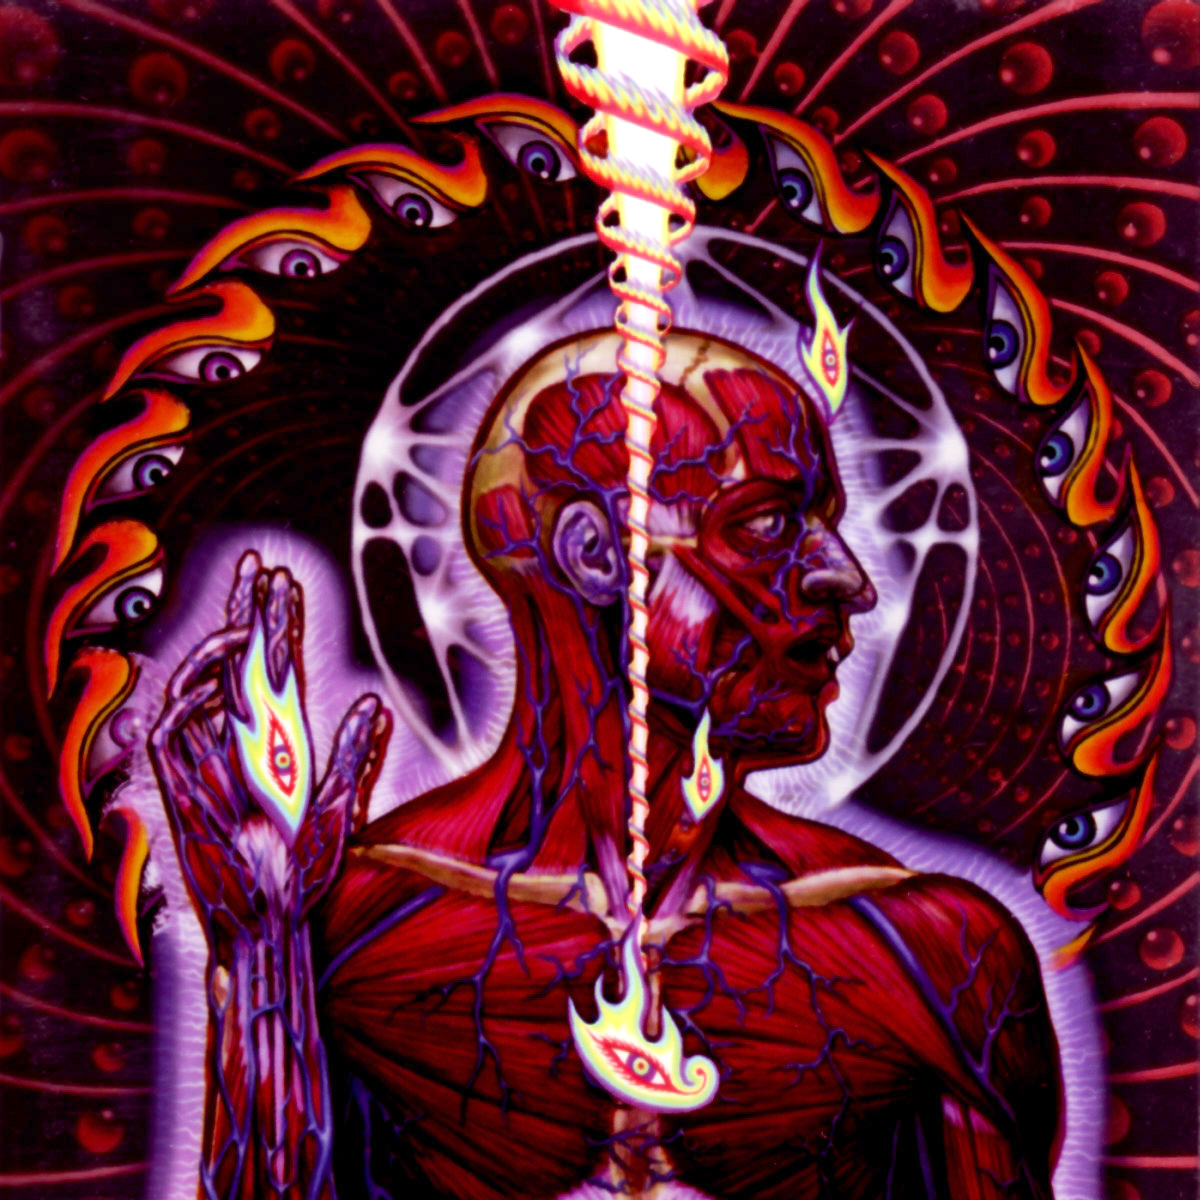 Tool - Lateralus - YouTube